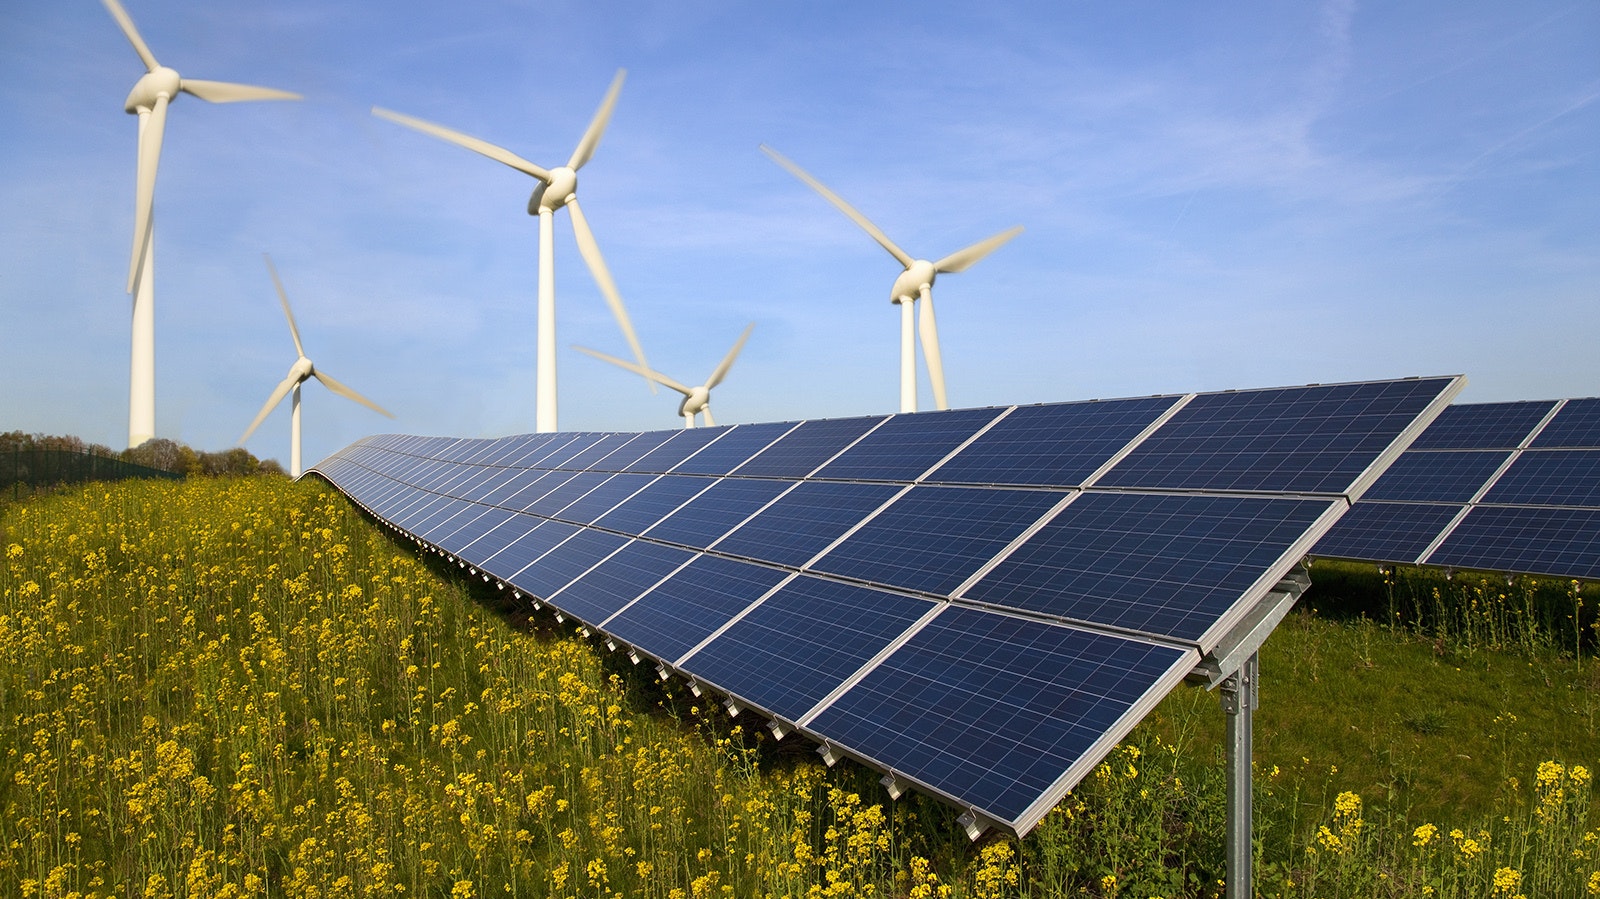 Energy Expert: Report That Renewables Are Going To Overtake World